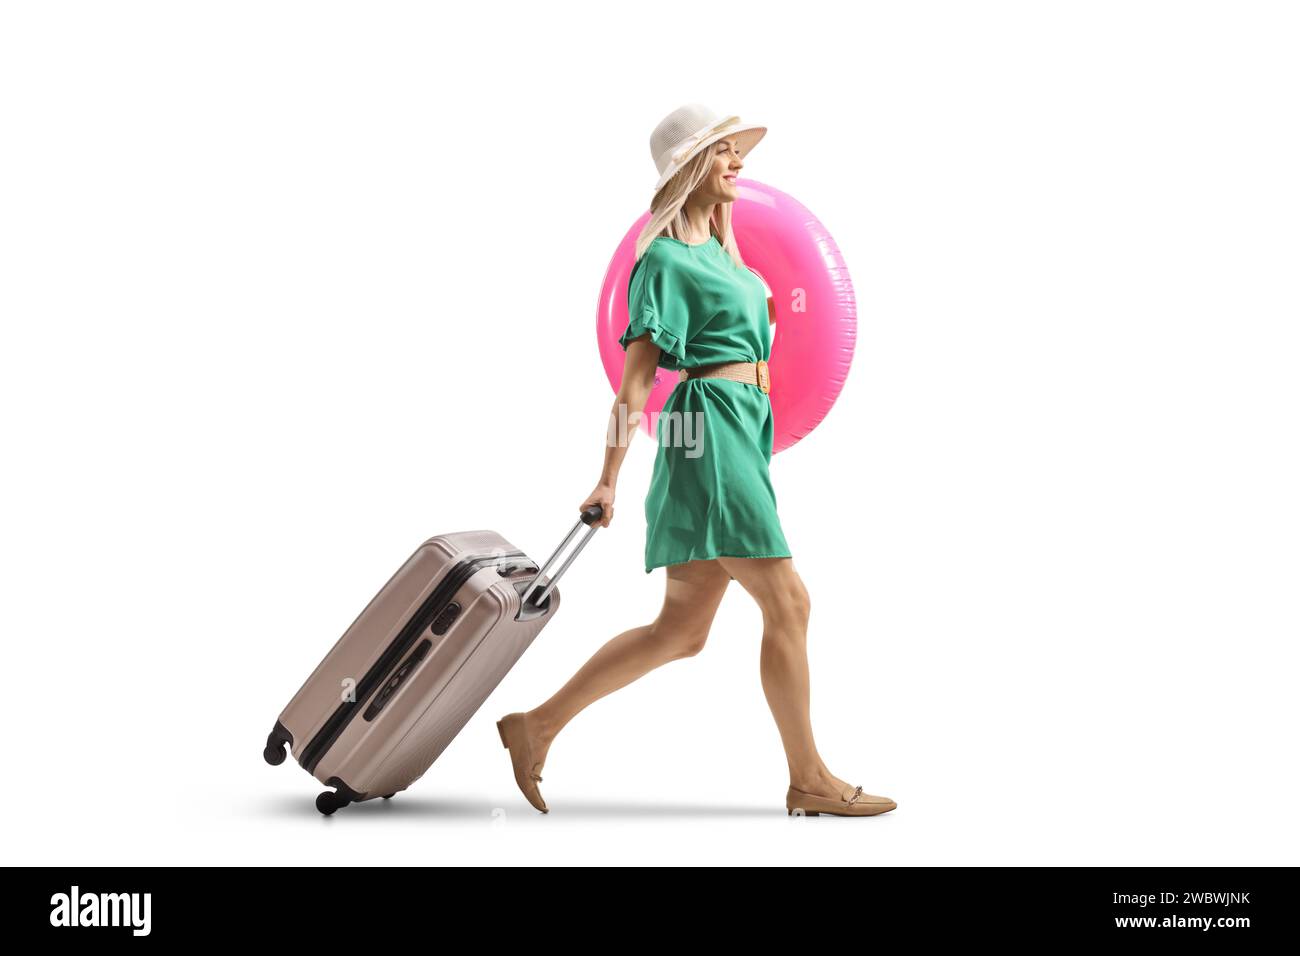 Full length profile shot of a young lady with a suitcase walking and carrying a swimming ring isolated on white background Stock Photo